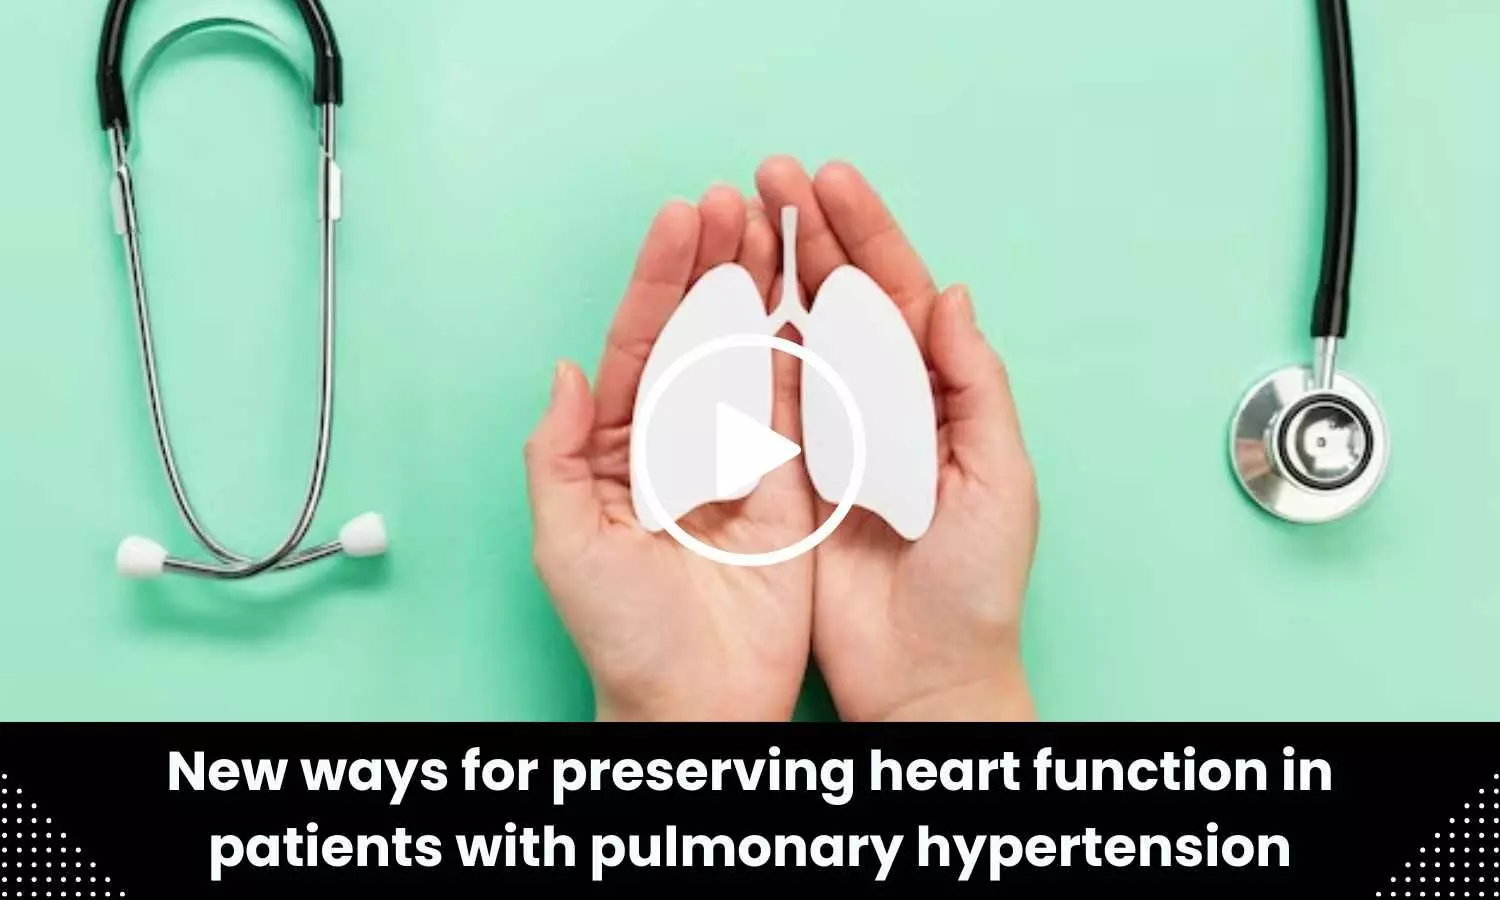 Preserving heart function in patients with pulmonary hypertension